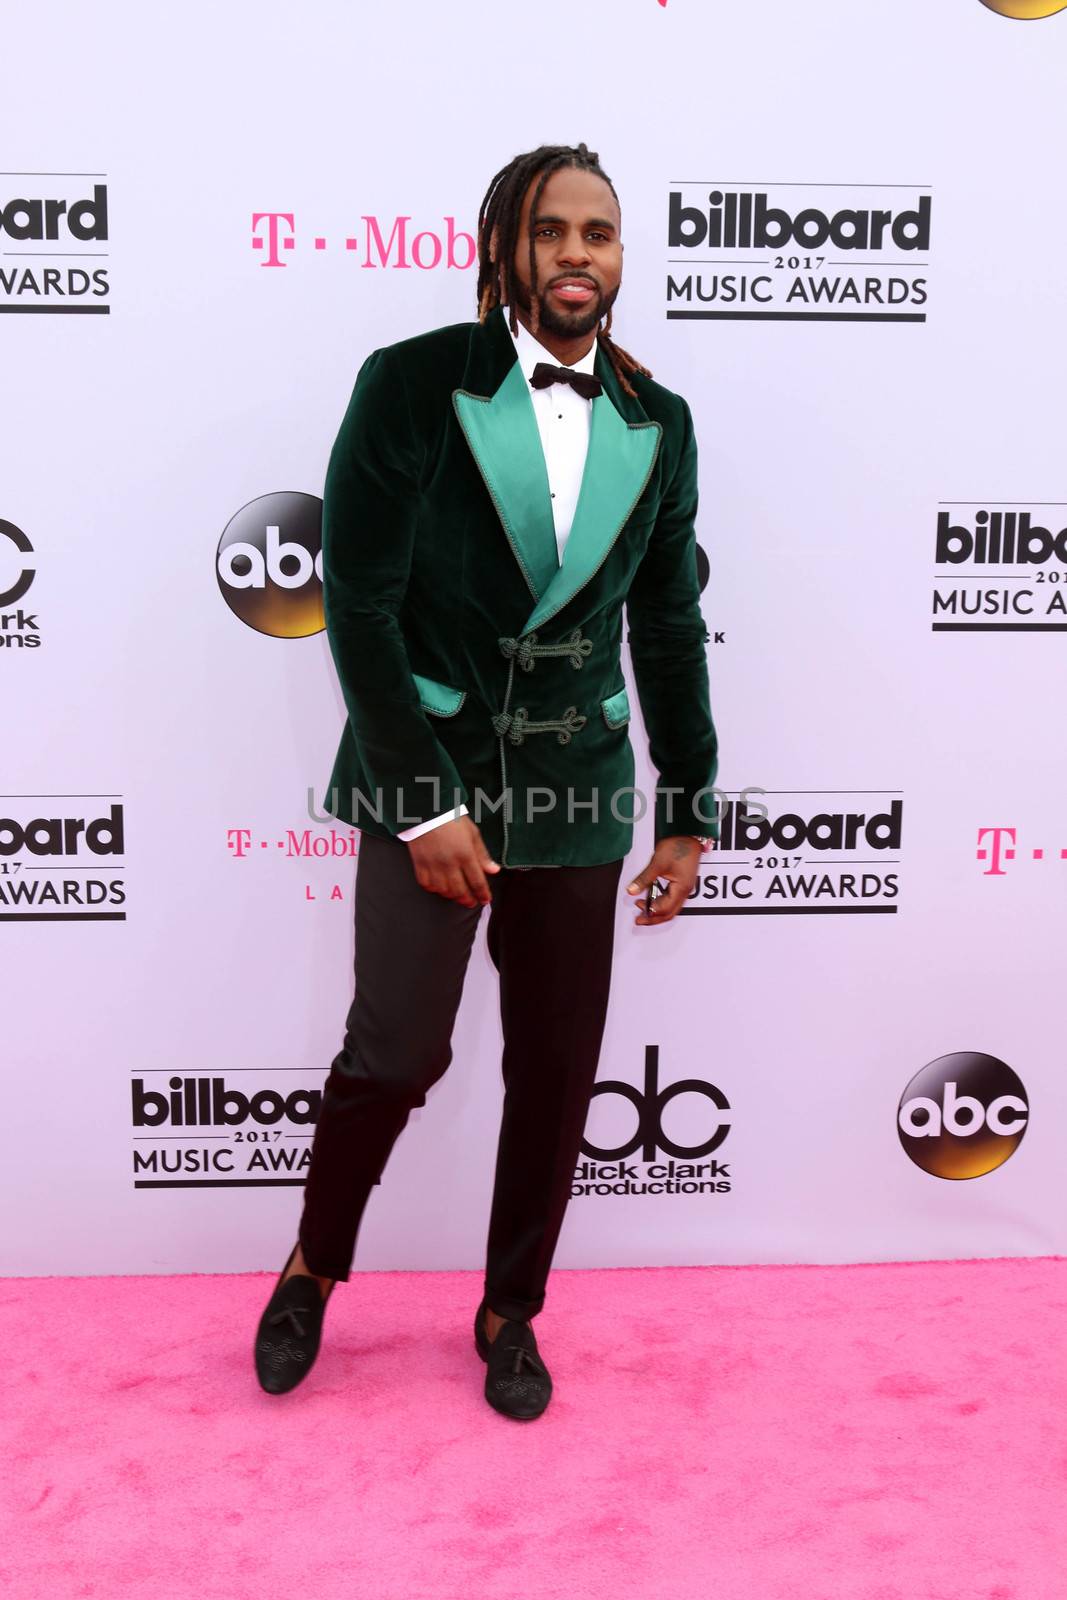 Jason Derulo
at the 2017 Billboard Awards Arrivals, T-Mobile Arena, Las Vegas, NV 05-21-17/ImageCollect by ImageCollect